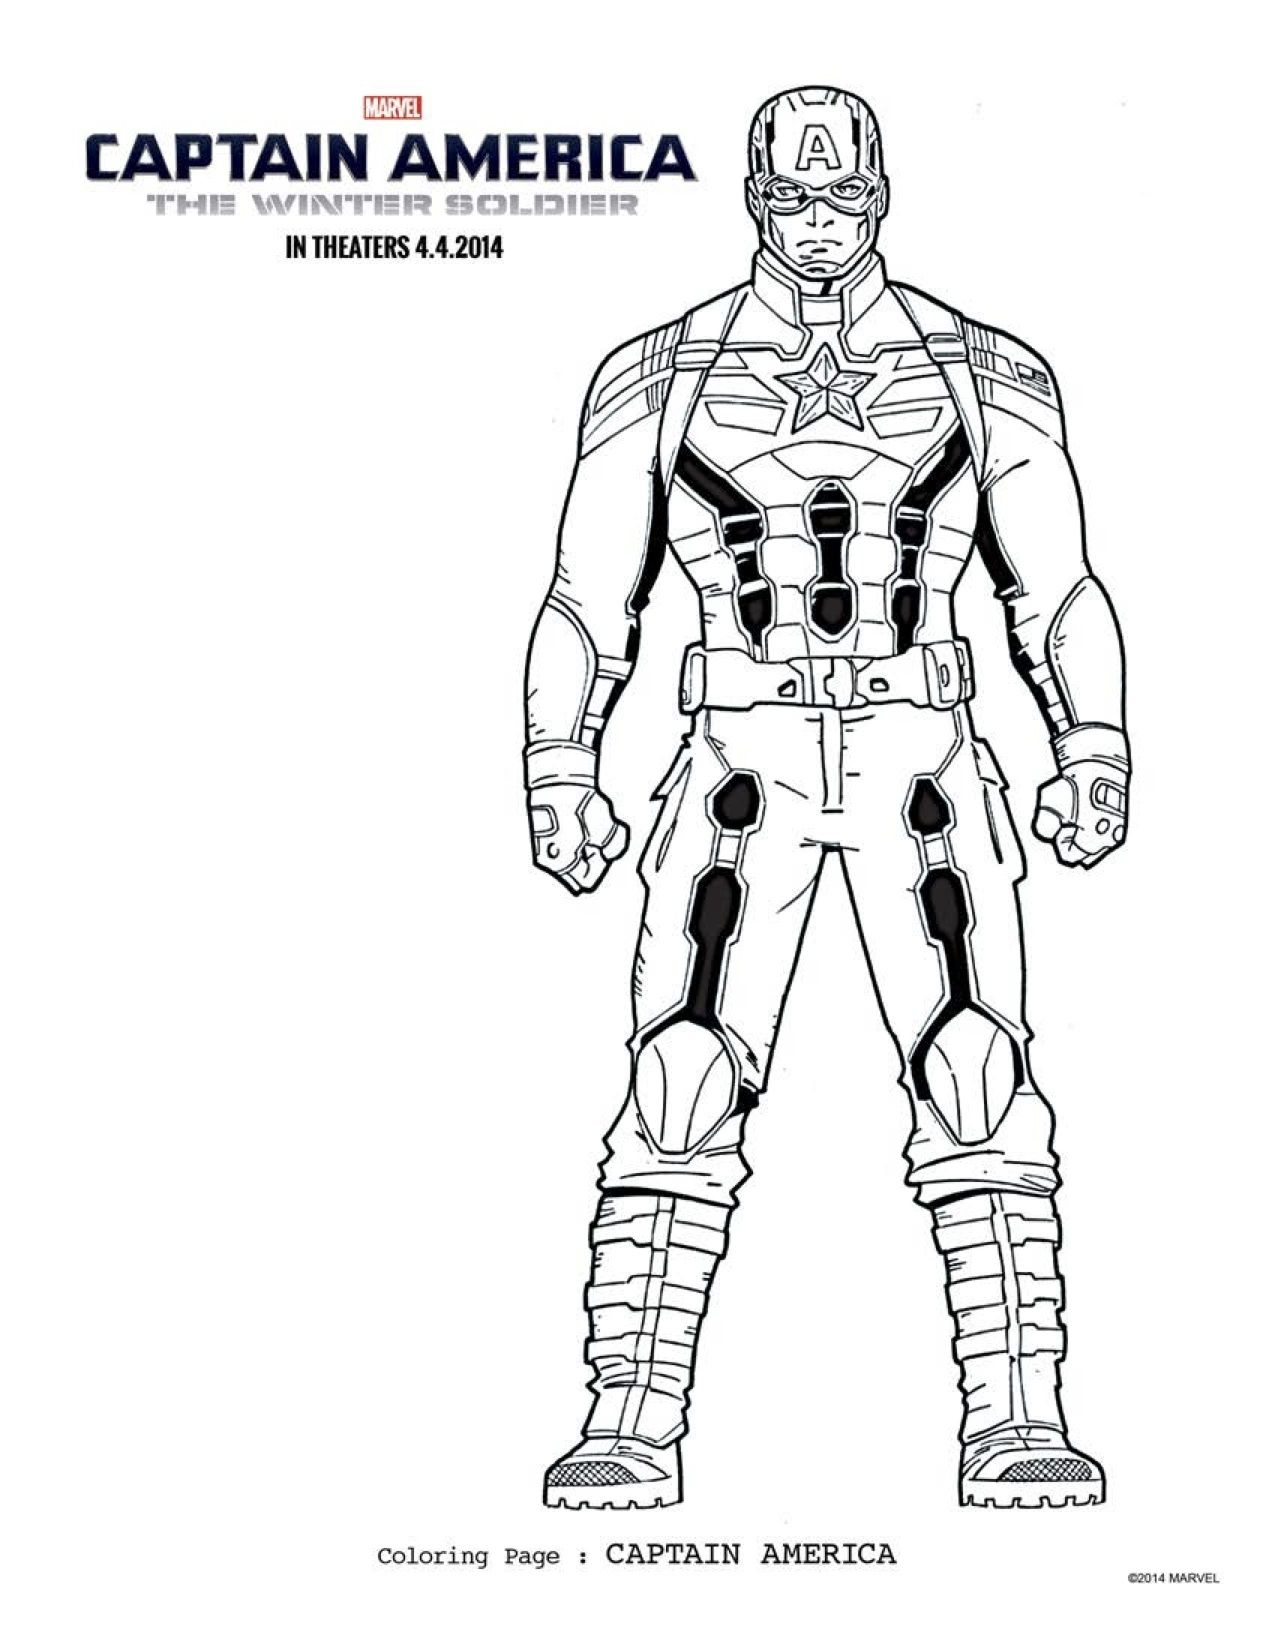 Captain America Coloring Pages - FREE Printable Coloring Pages ...